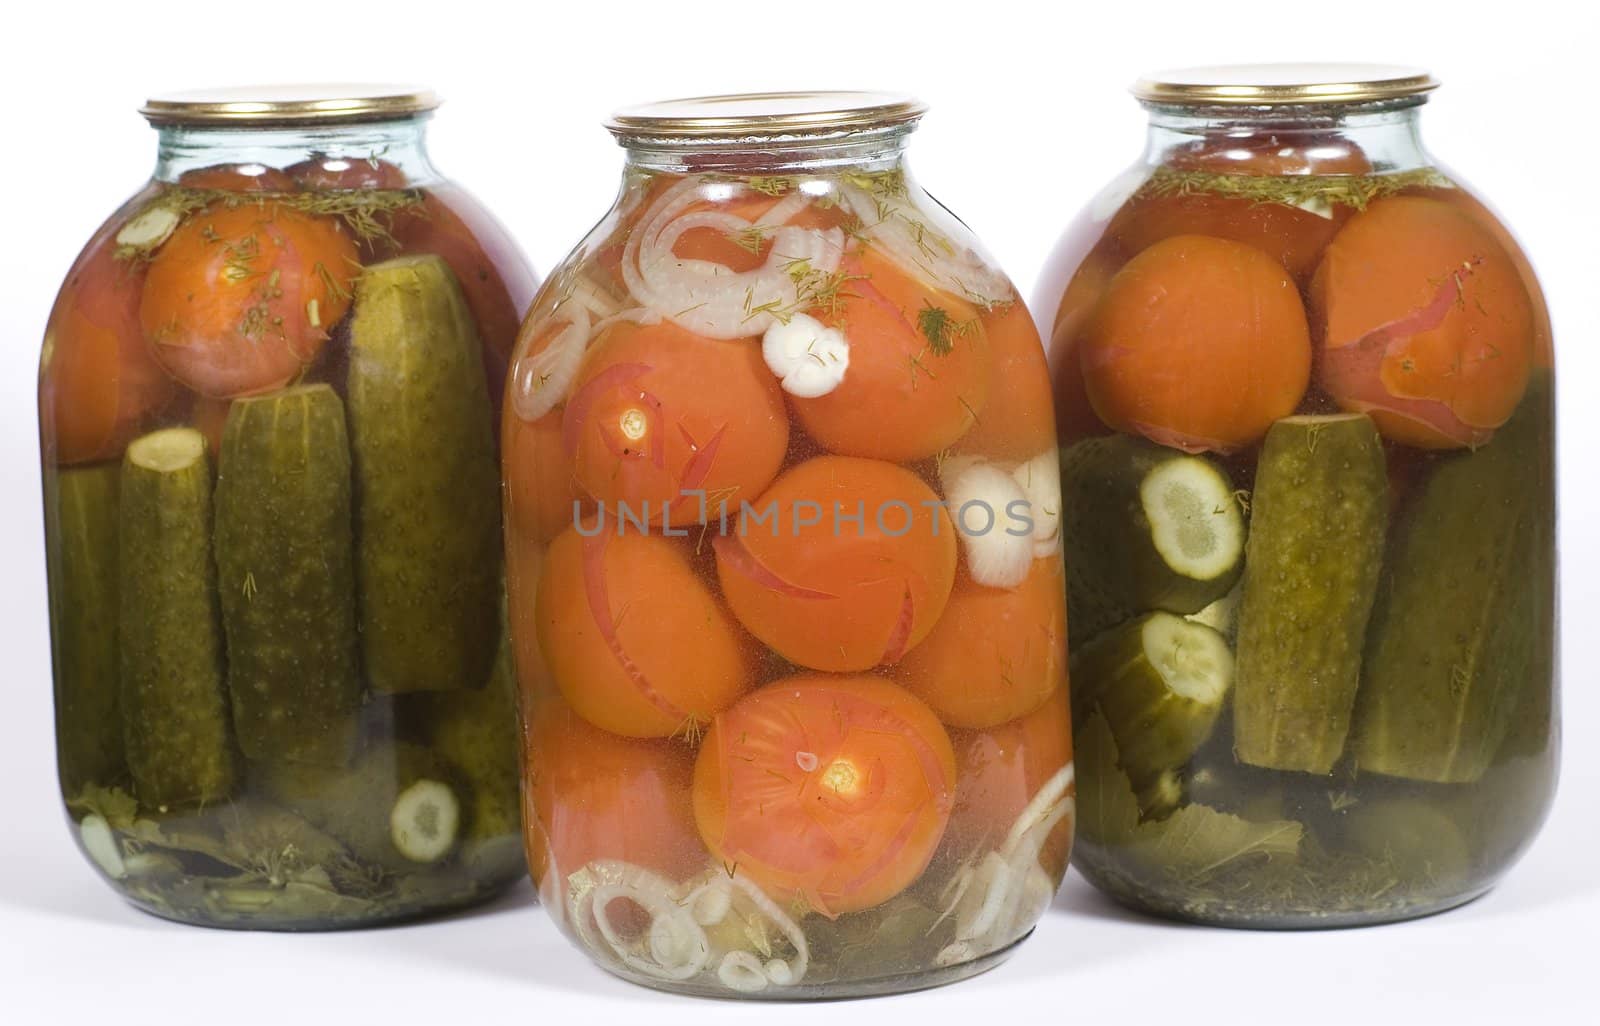 Pickle glass jars on a white background